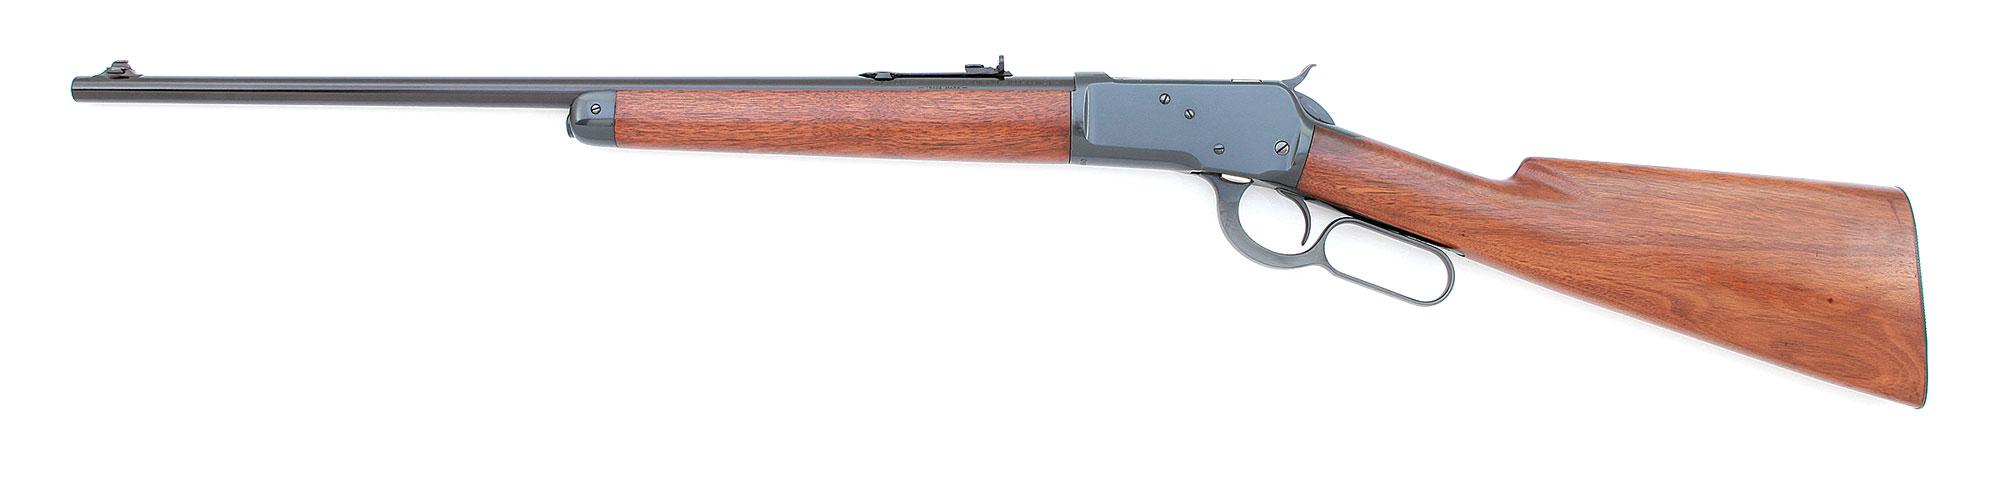 Excellent Winchester Model 53 Transitional Lever Action Rifle